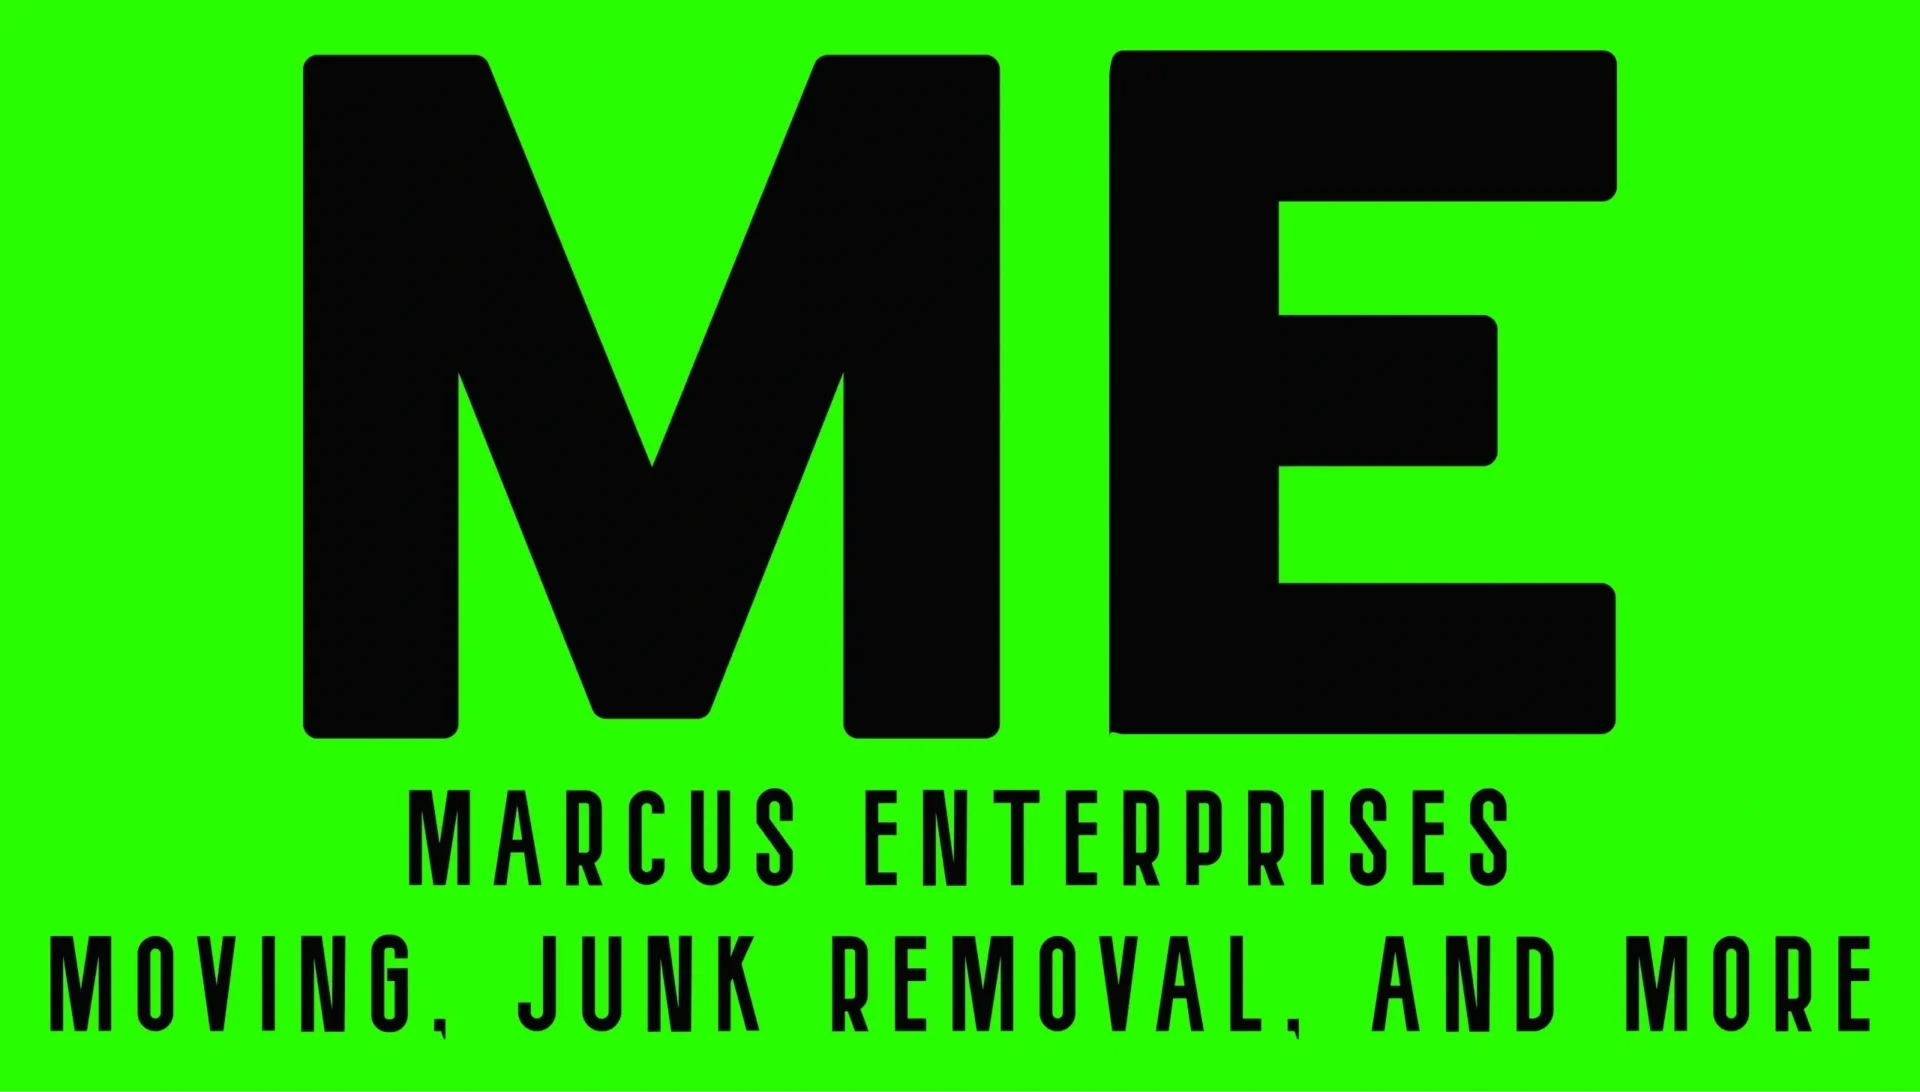 A green and black logo for marcus enterprises